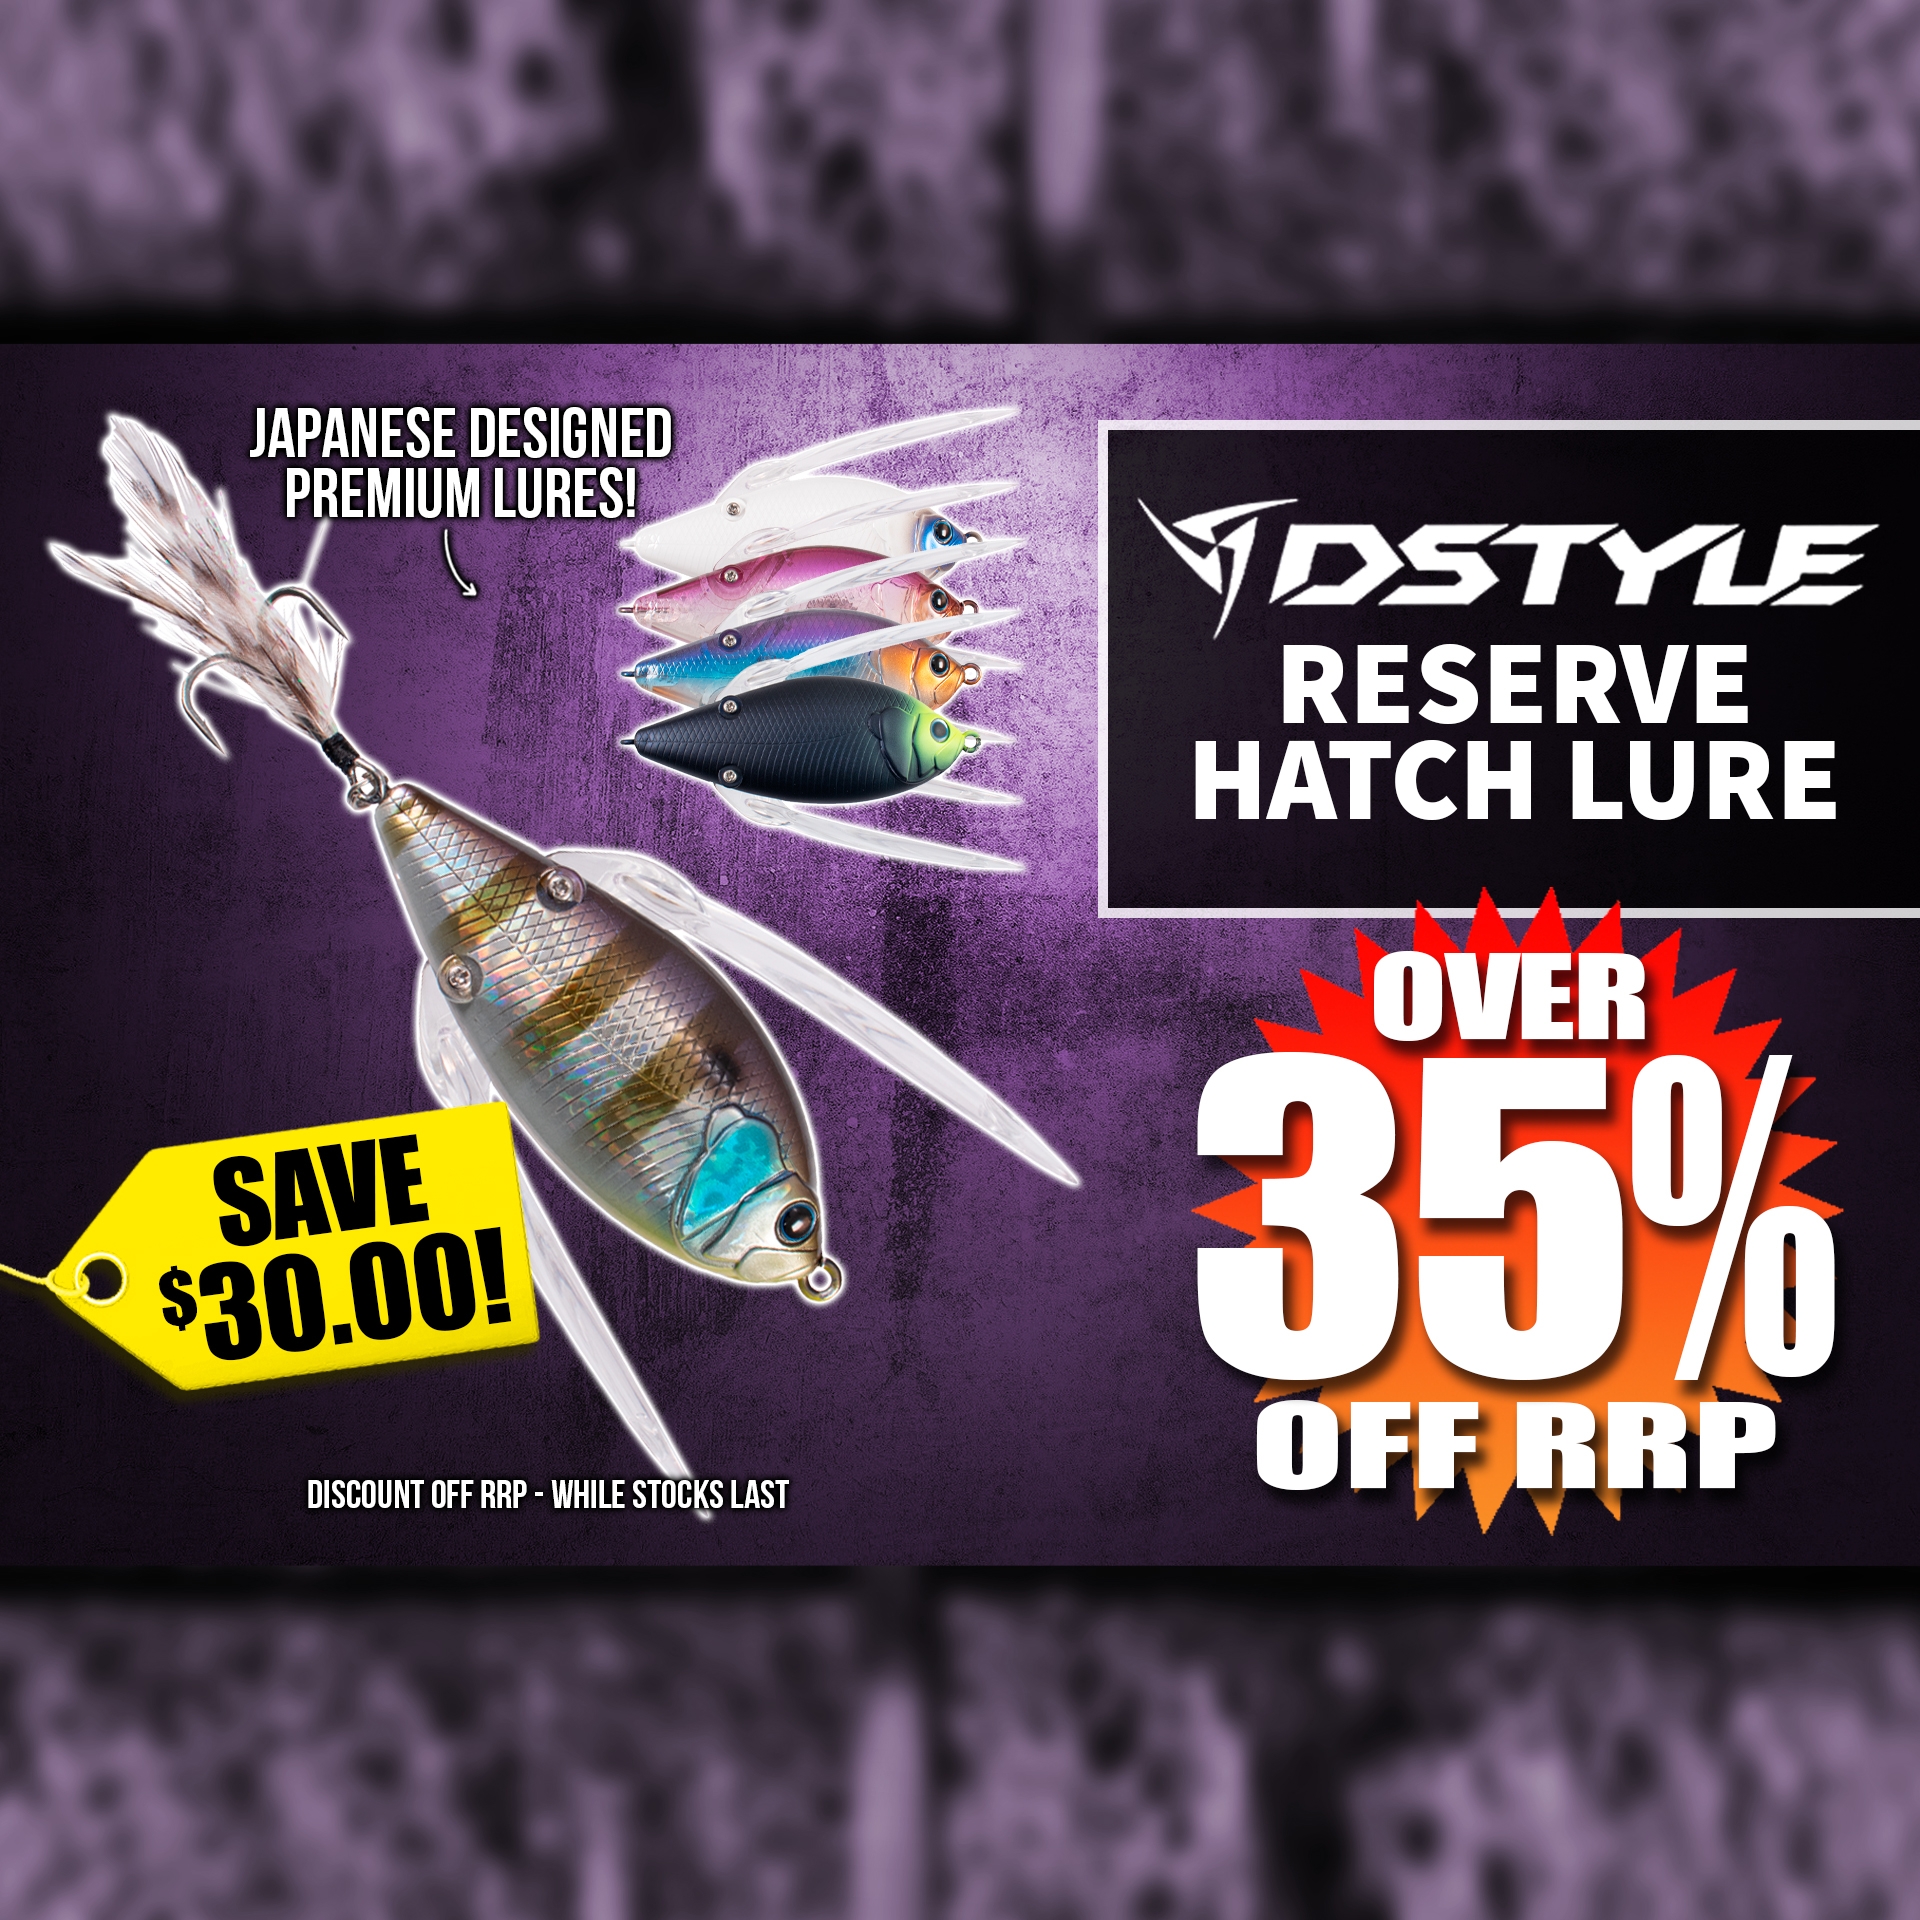 35% off DSTYLE RESERVE HATCH LURE